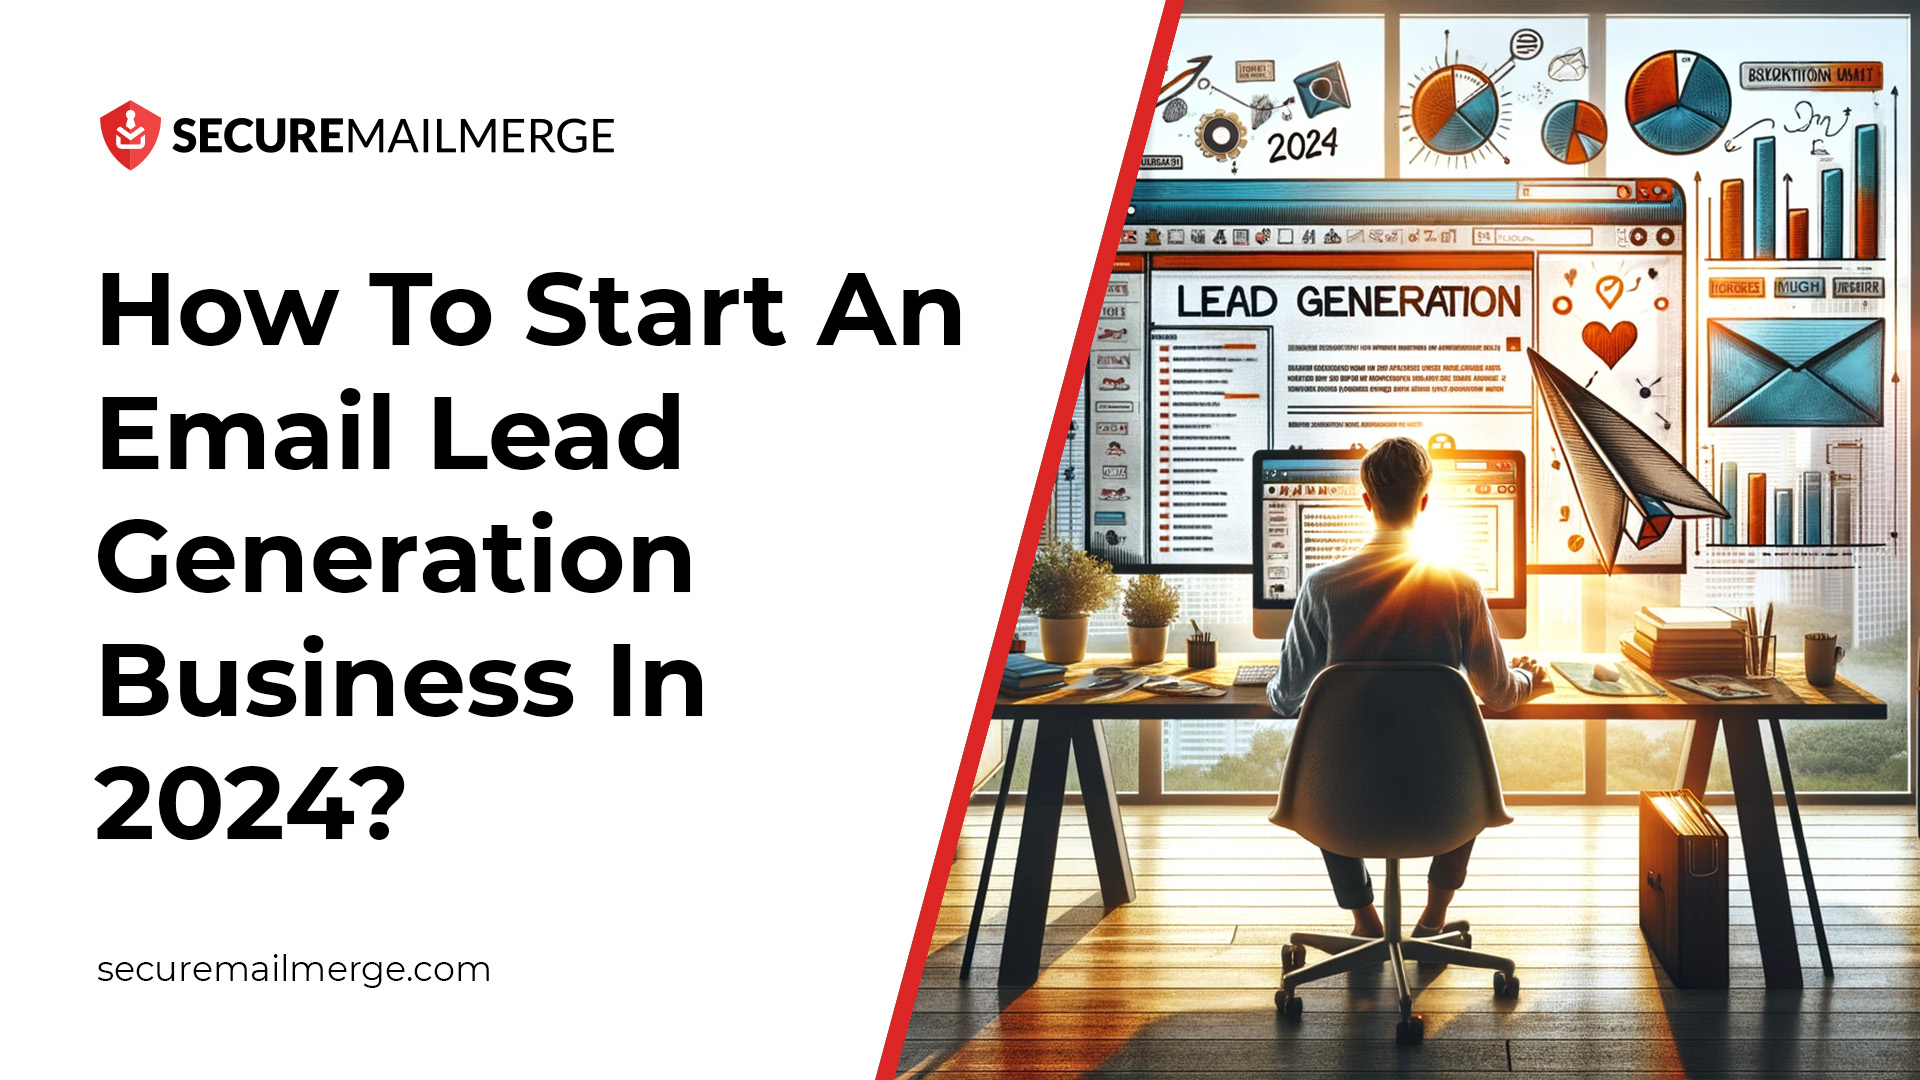 How To Start An Email Lead Generation Business In 2024?